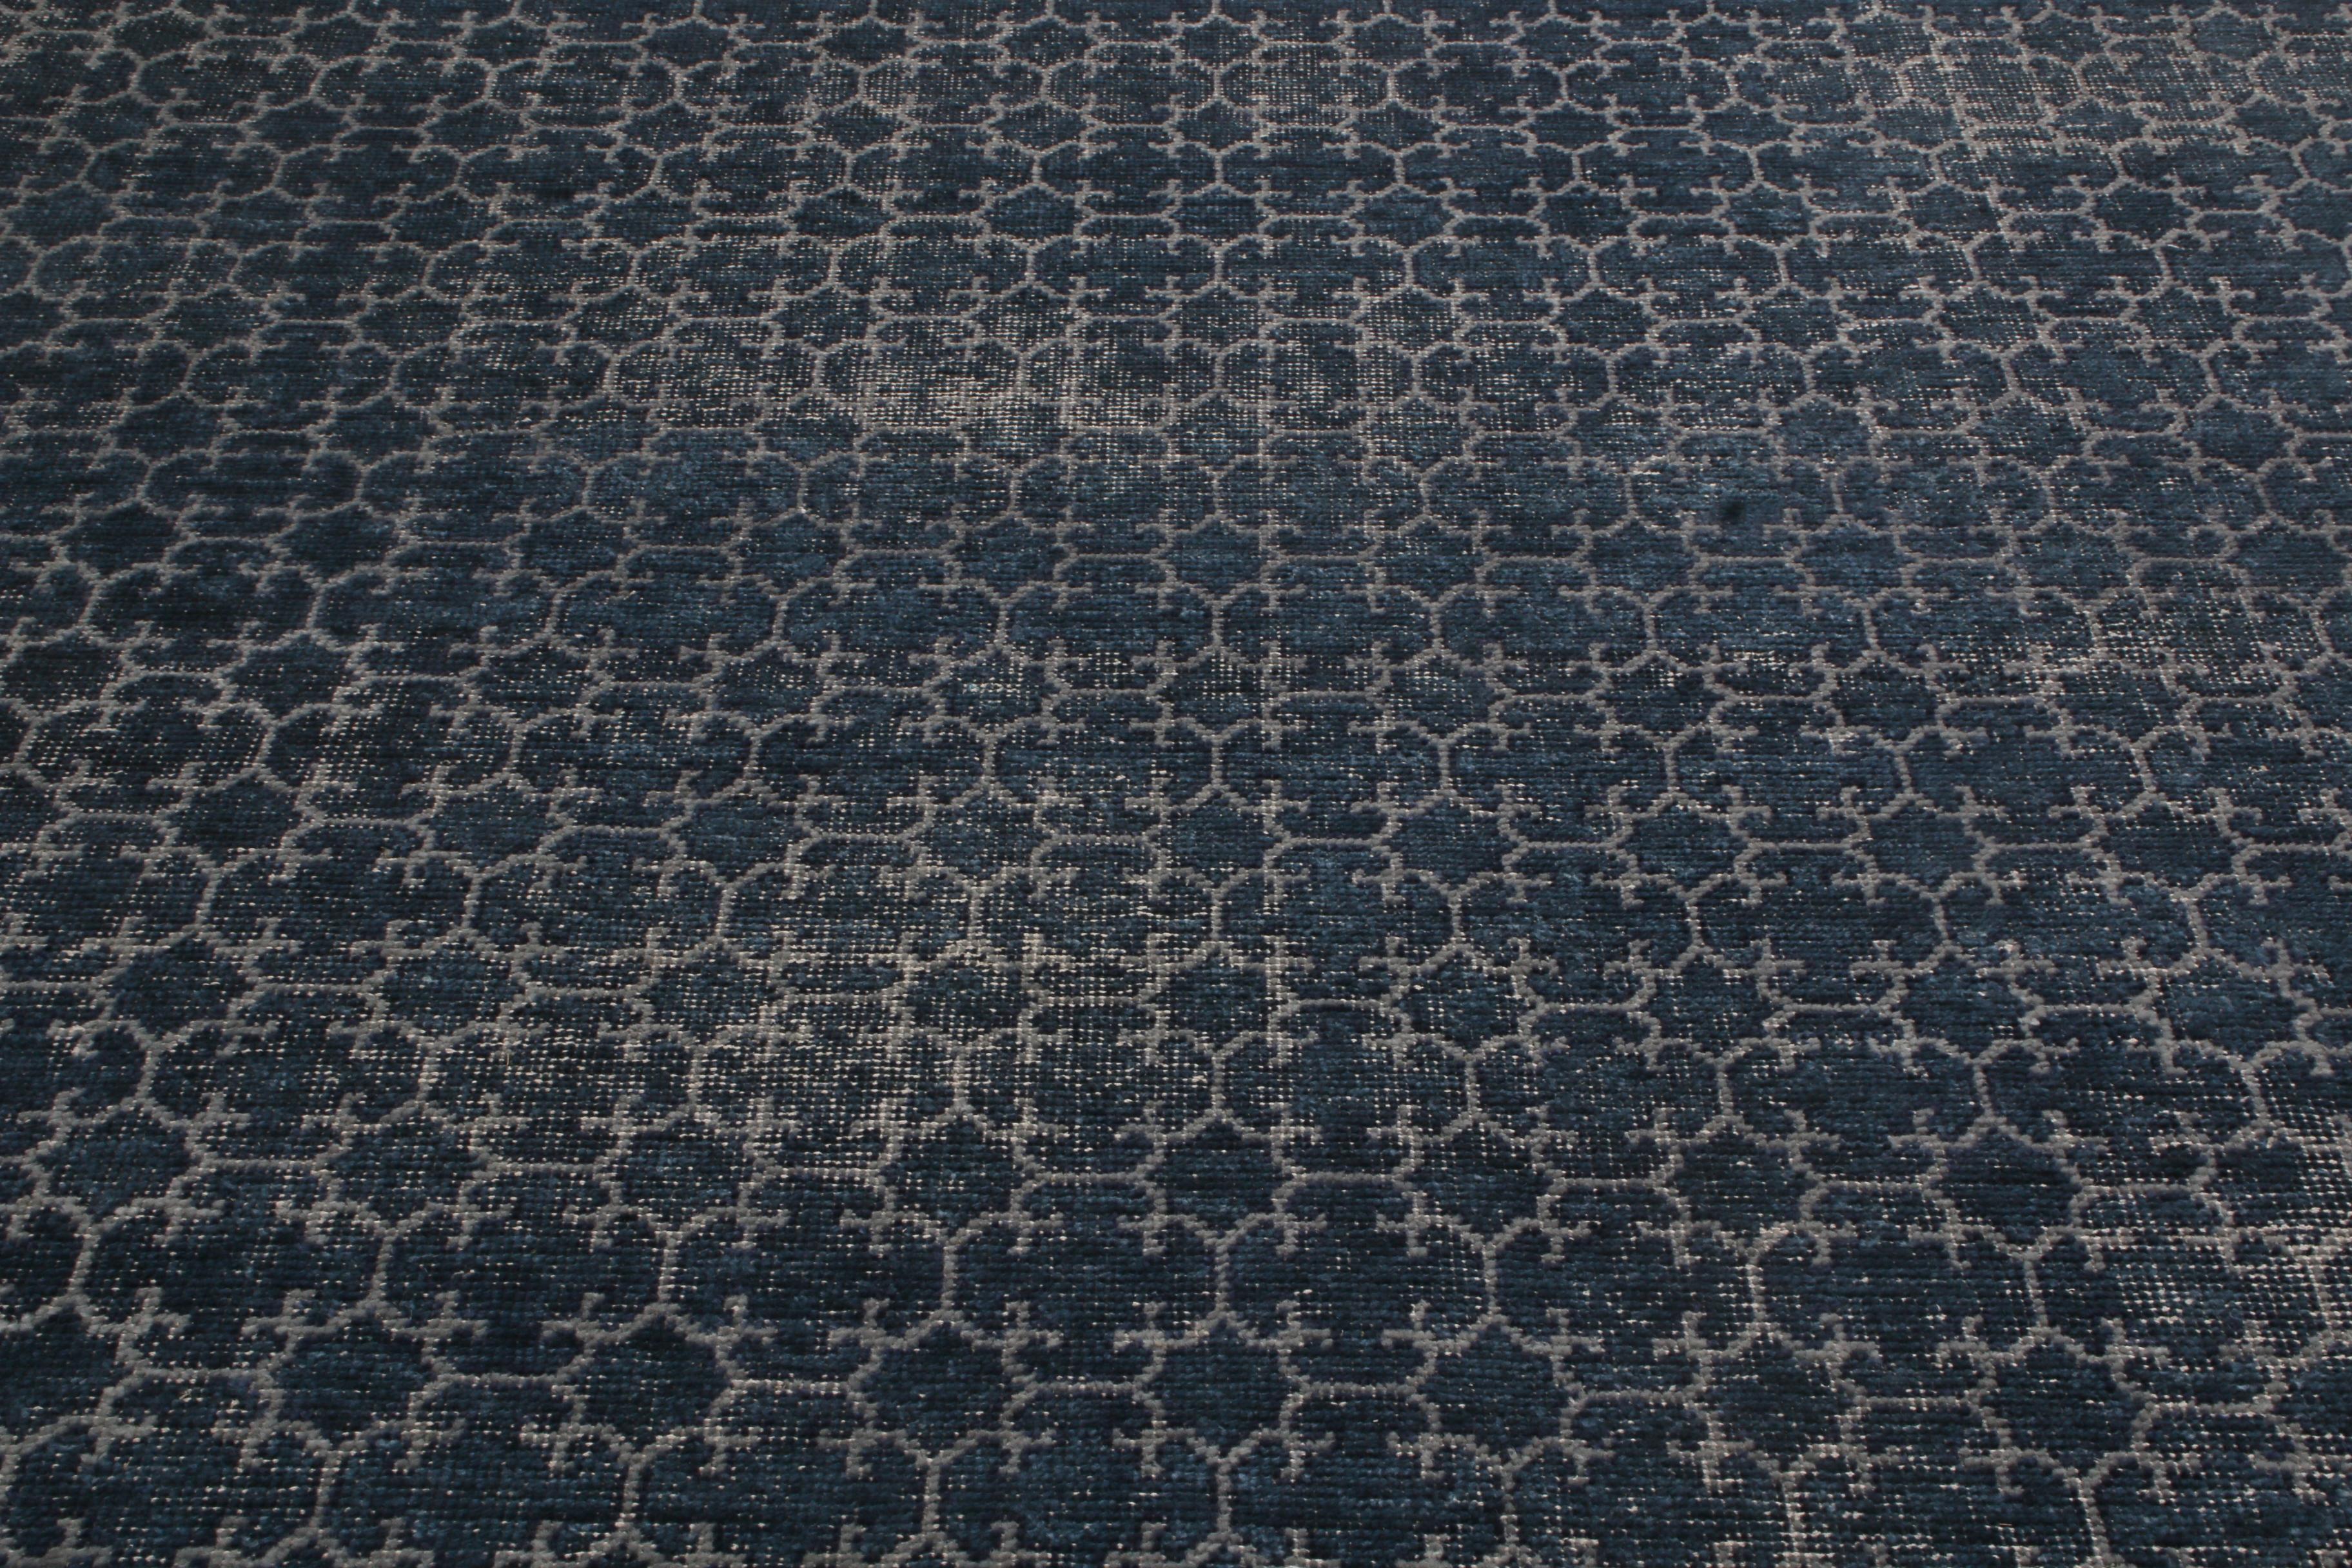 Indian Rug & Kilim's Khotan Navy Smoke Blue Wool Rug from the Homage Collection